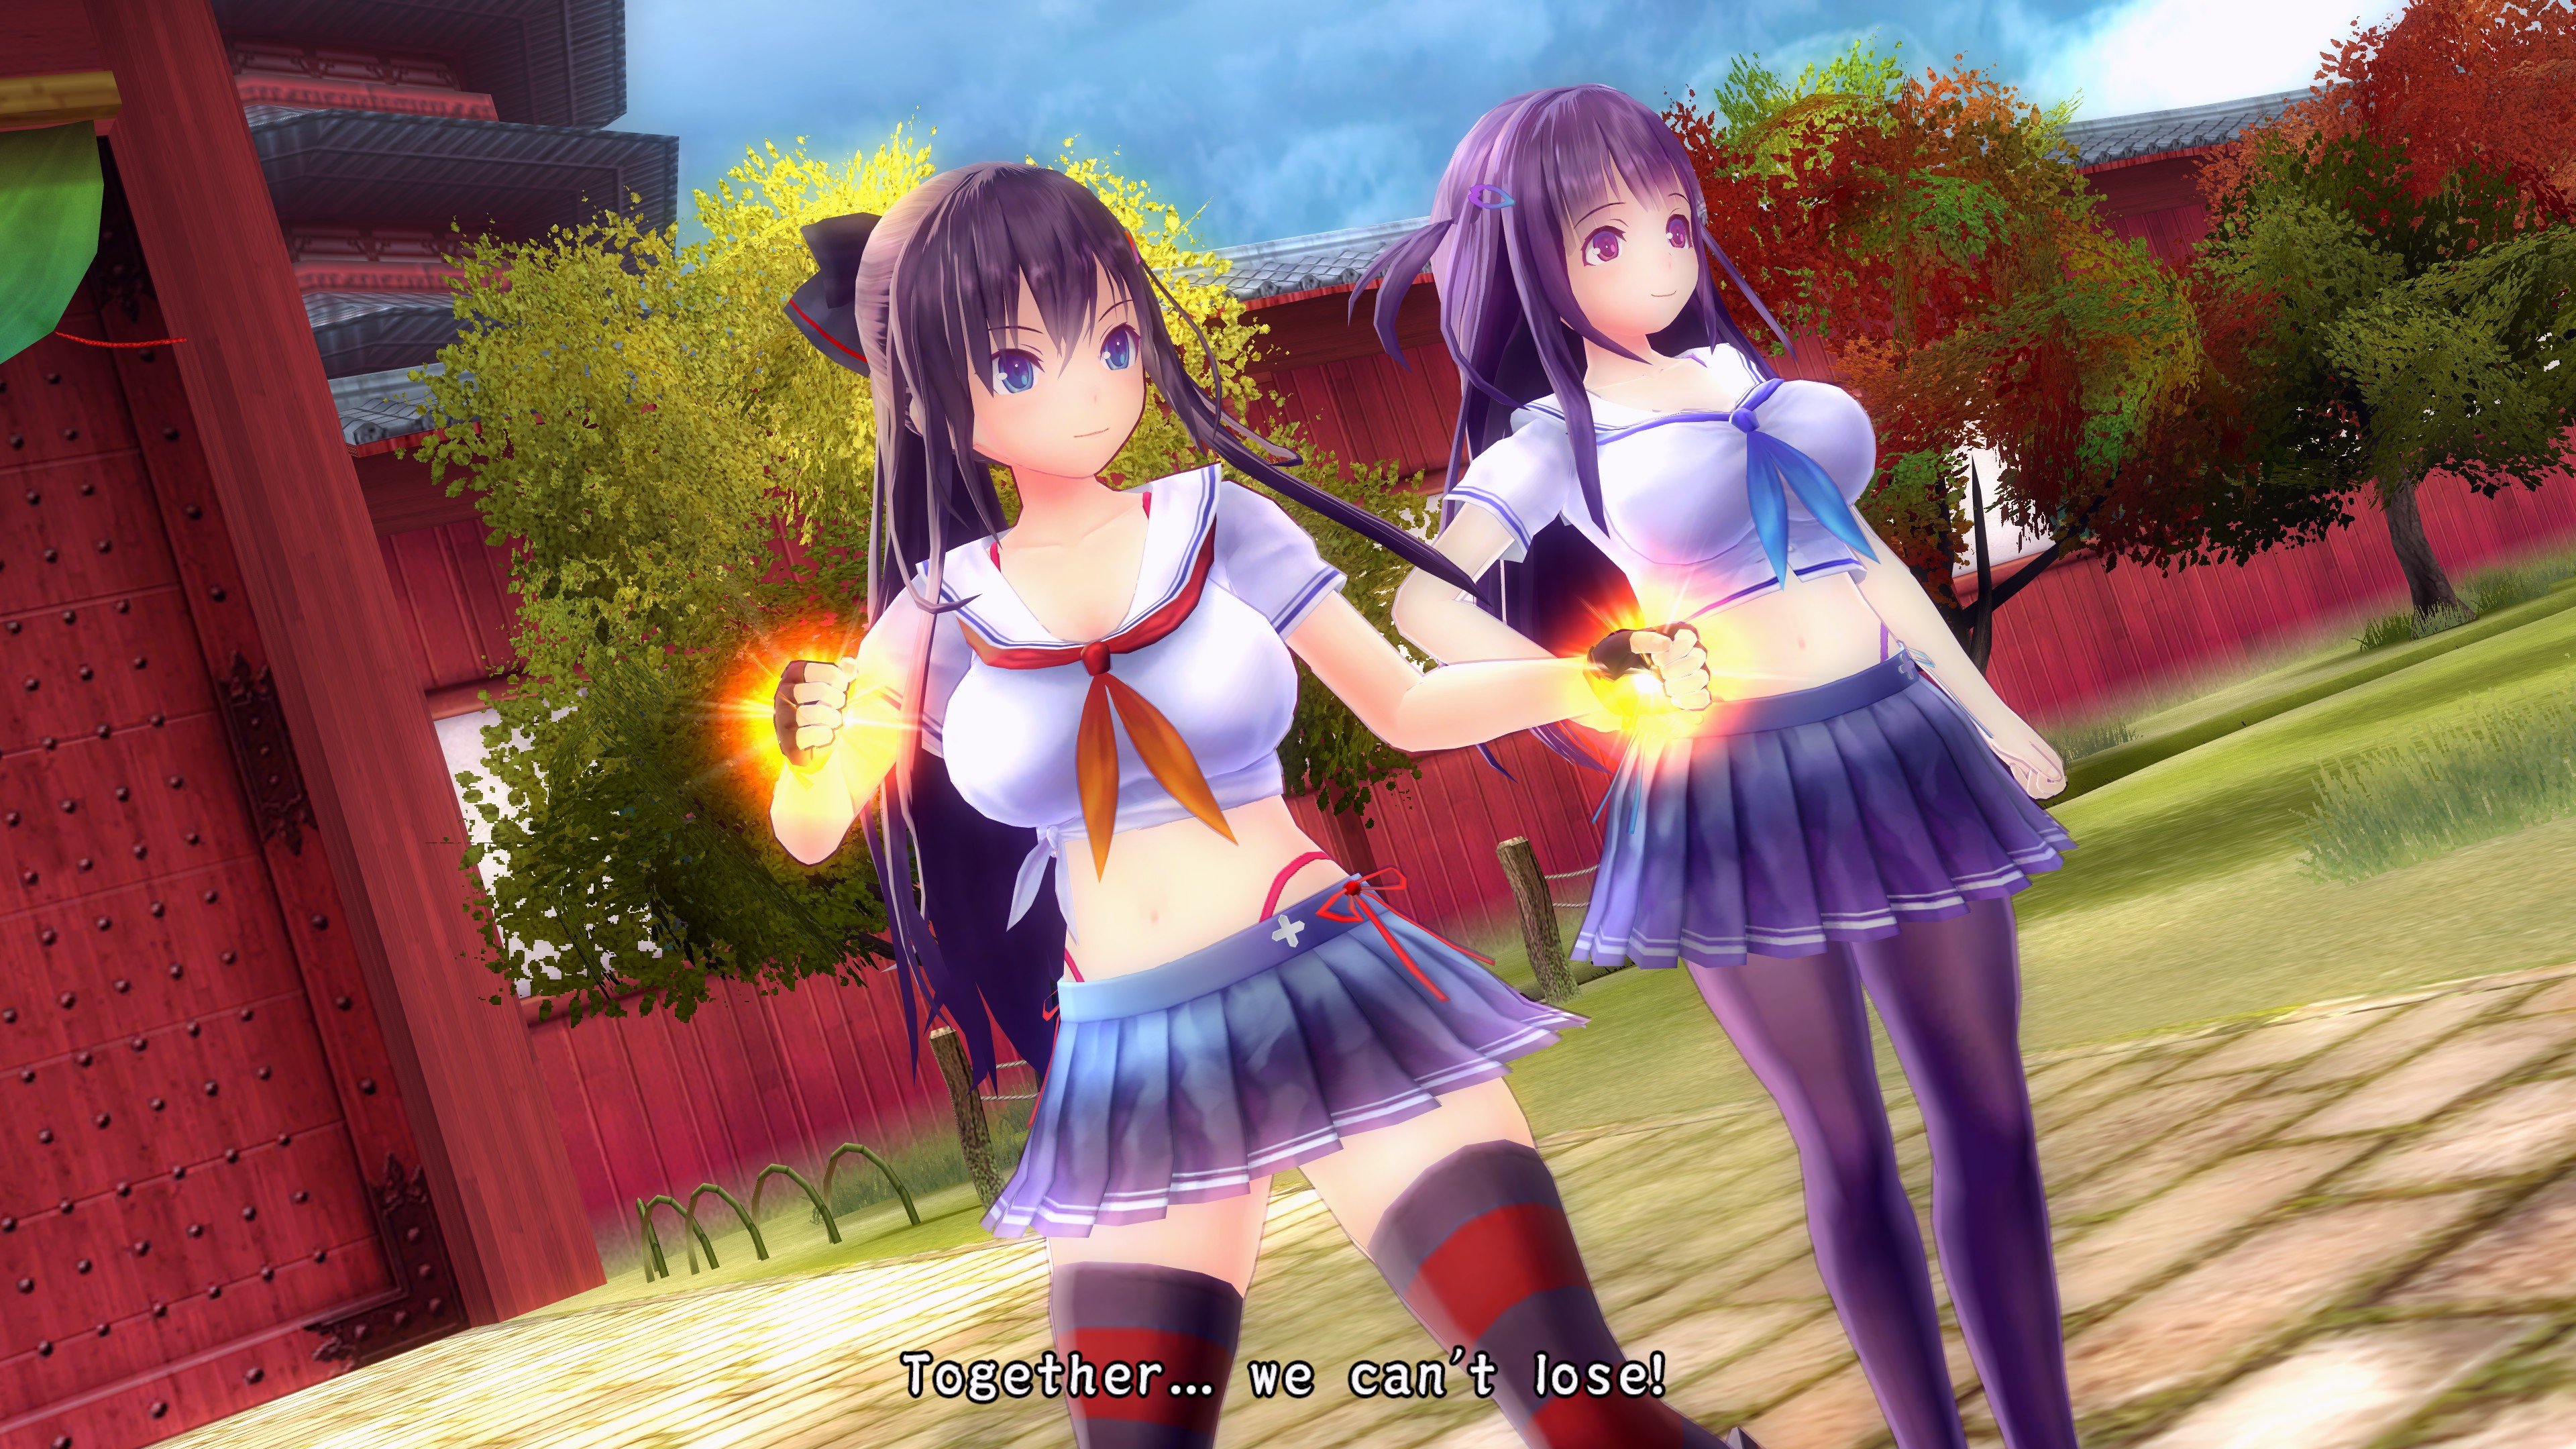 DataBlitz - WEAPONIZED WOMEN POWERED BY PLEASURE! Valkyrie Drive Bhikkhuni  for PS Vita will be available today at Datablitz! Valkyrie Drive: Bhikkhuni  is the outrageous new project by the creators of Senran